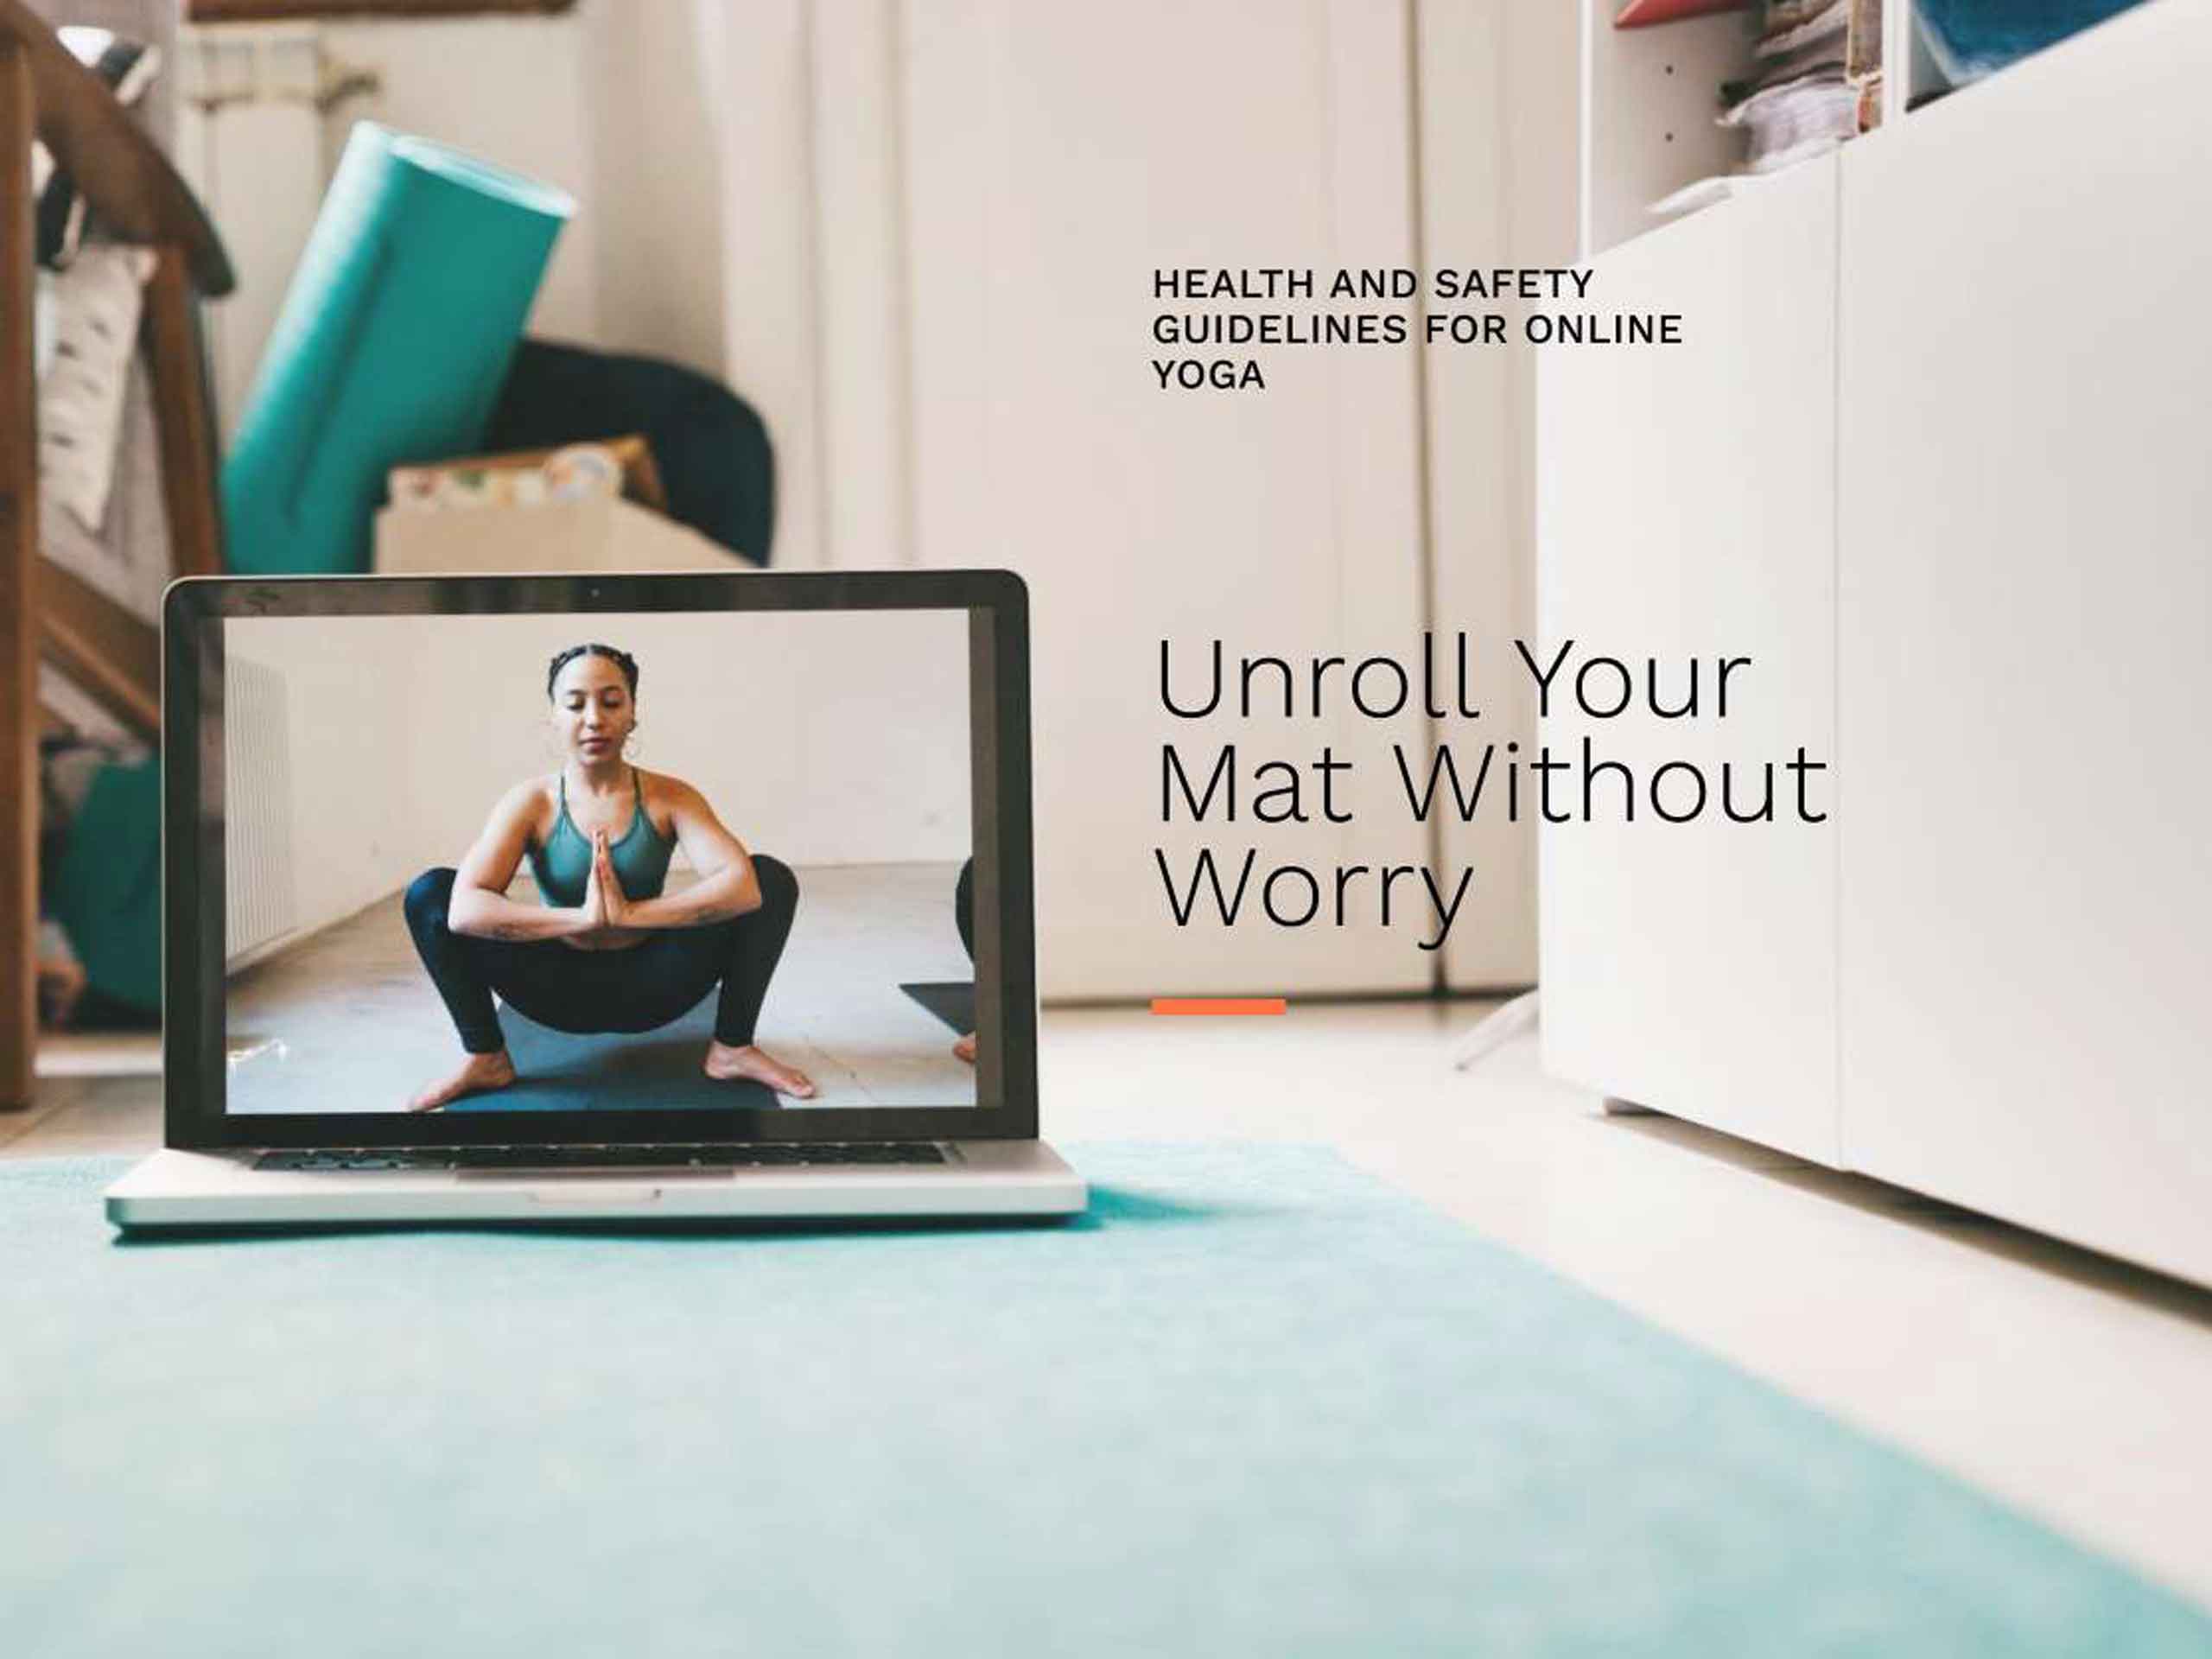 Unroll Your Mat Without Worry: Health and Safety Guidelines for Online Yoga